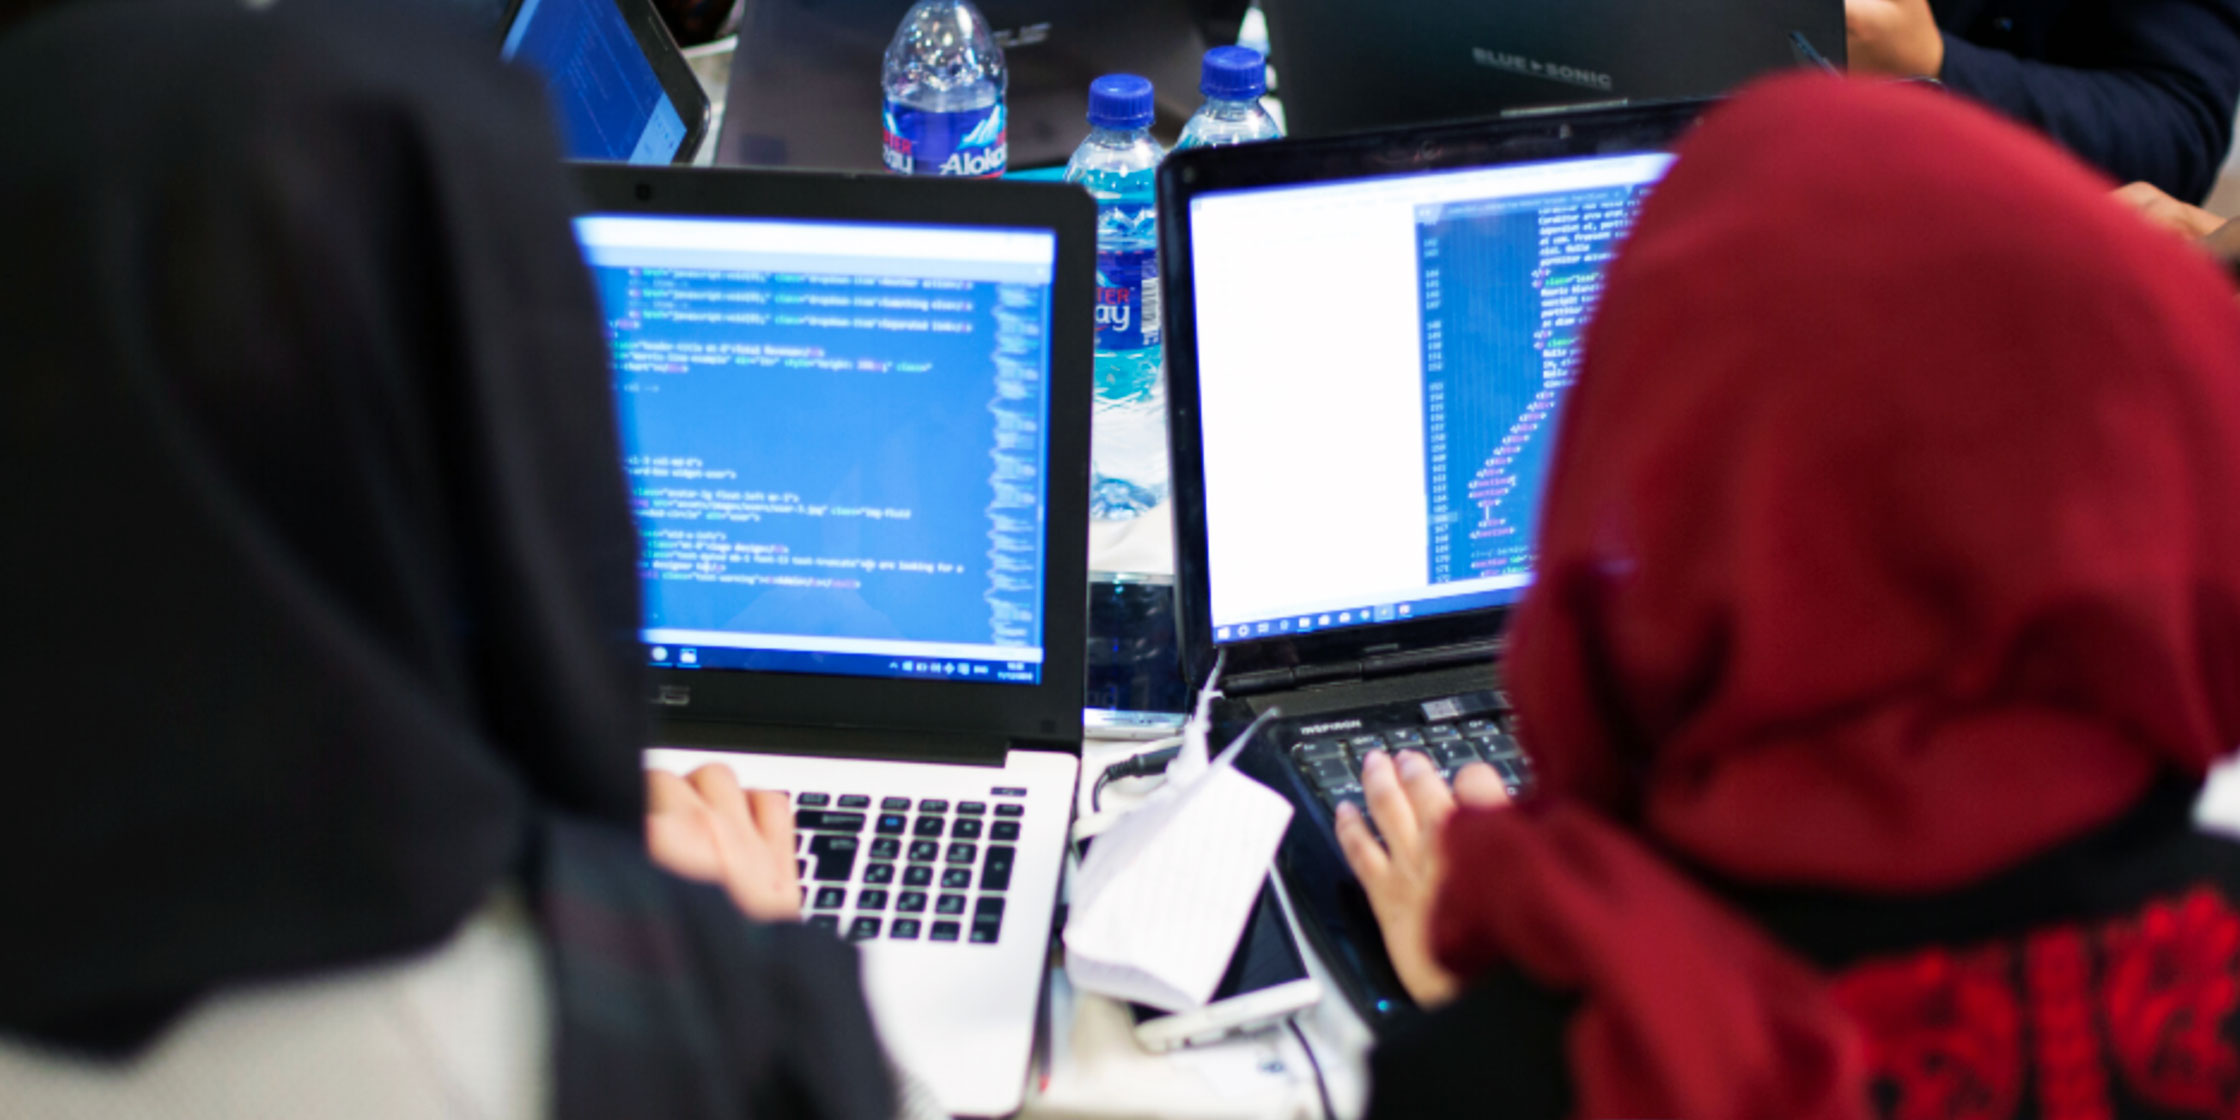 Two women wearing hijab are working at their laptops